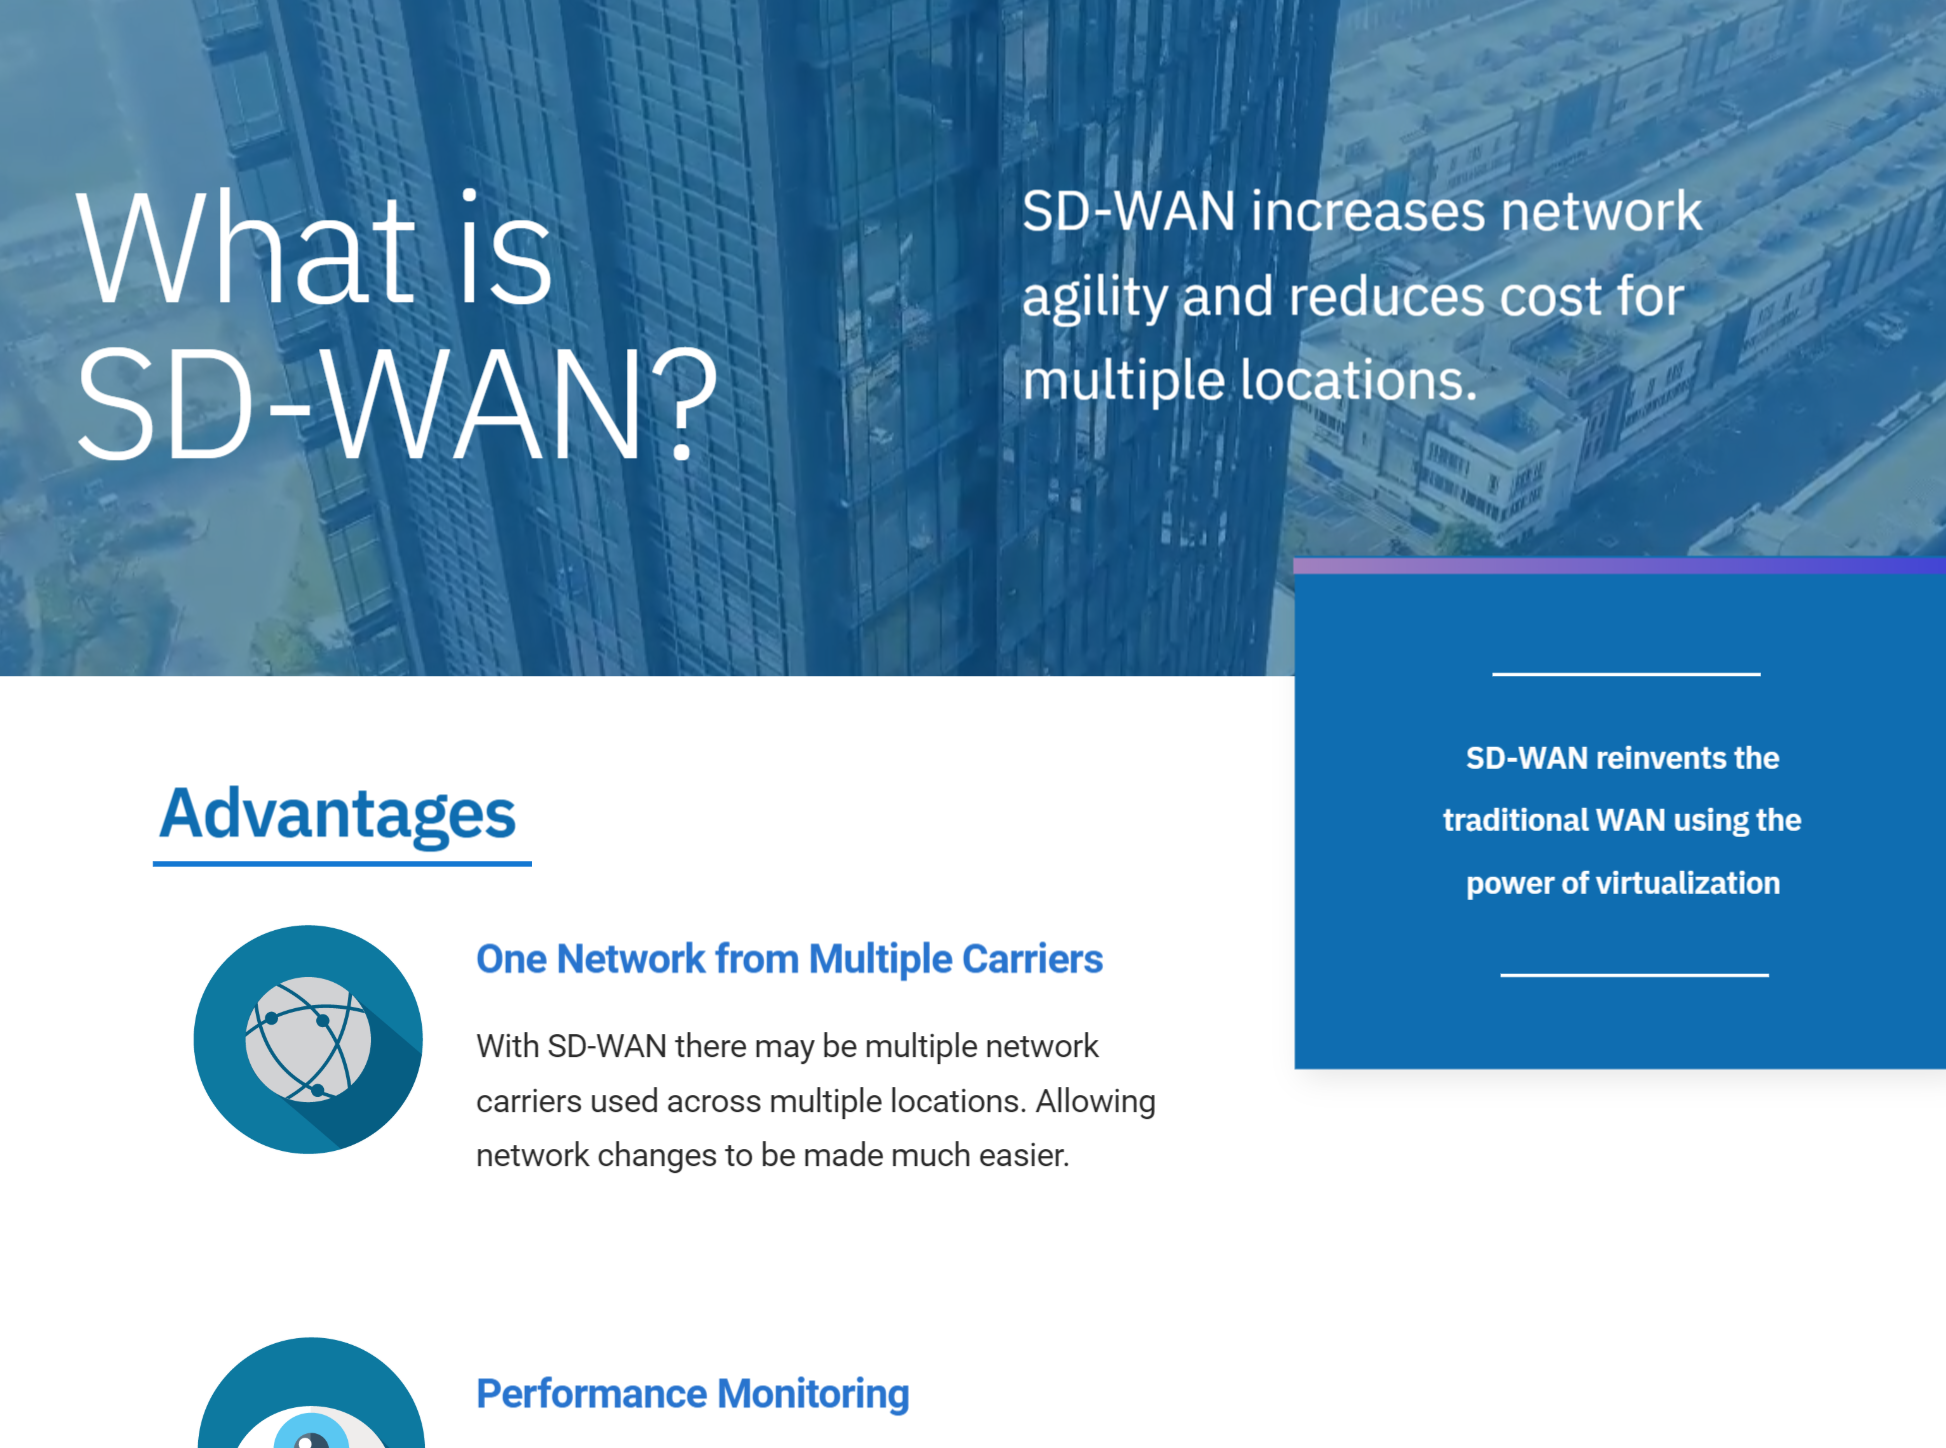 What is SD-WAN